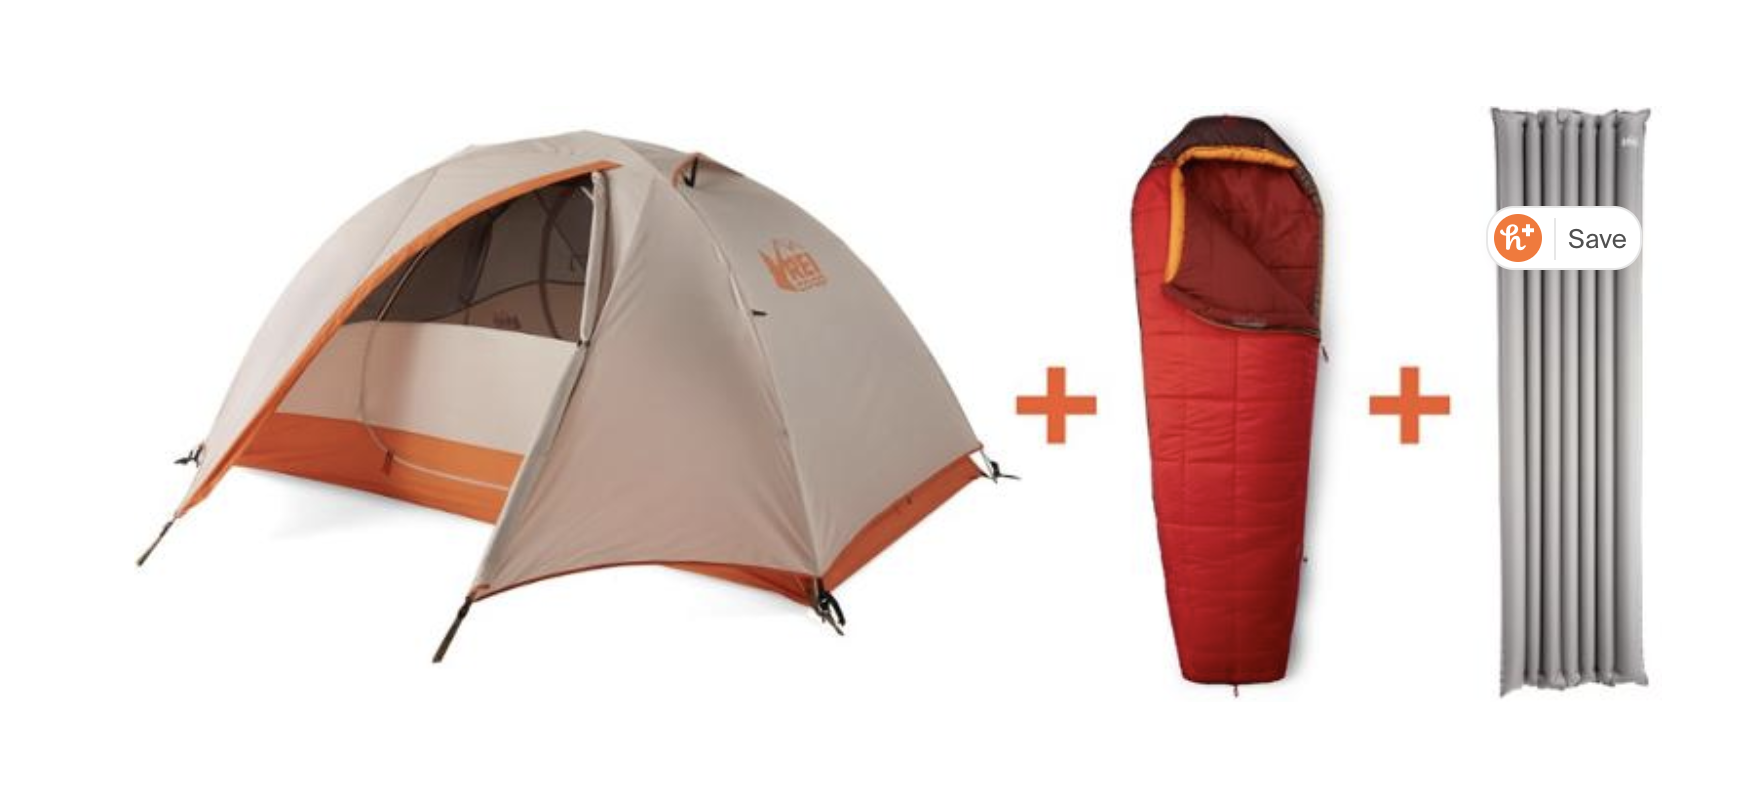 REI’s Backpacking bundle is a great way for beginners to save some money on gear.